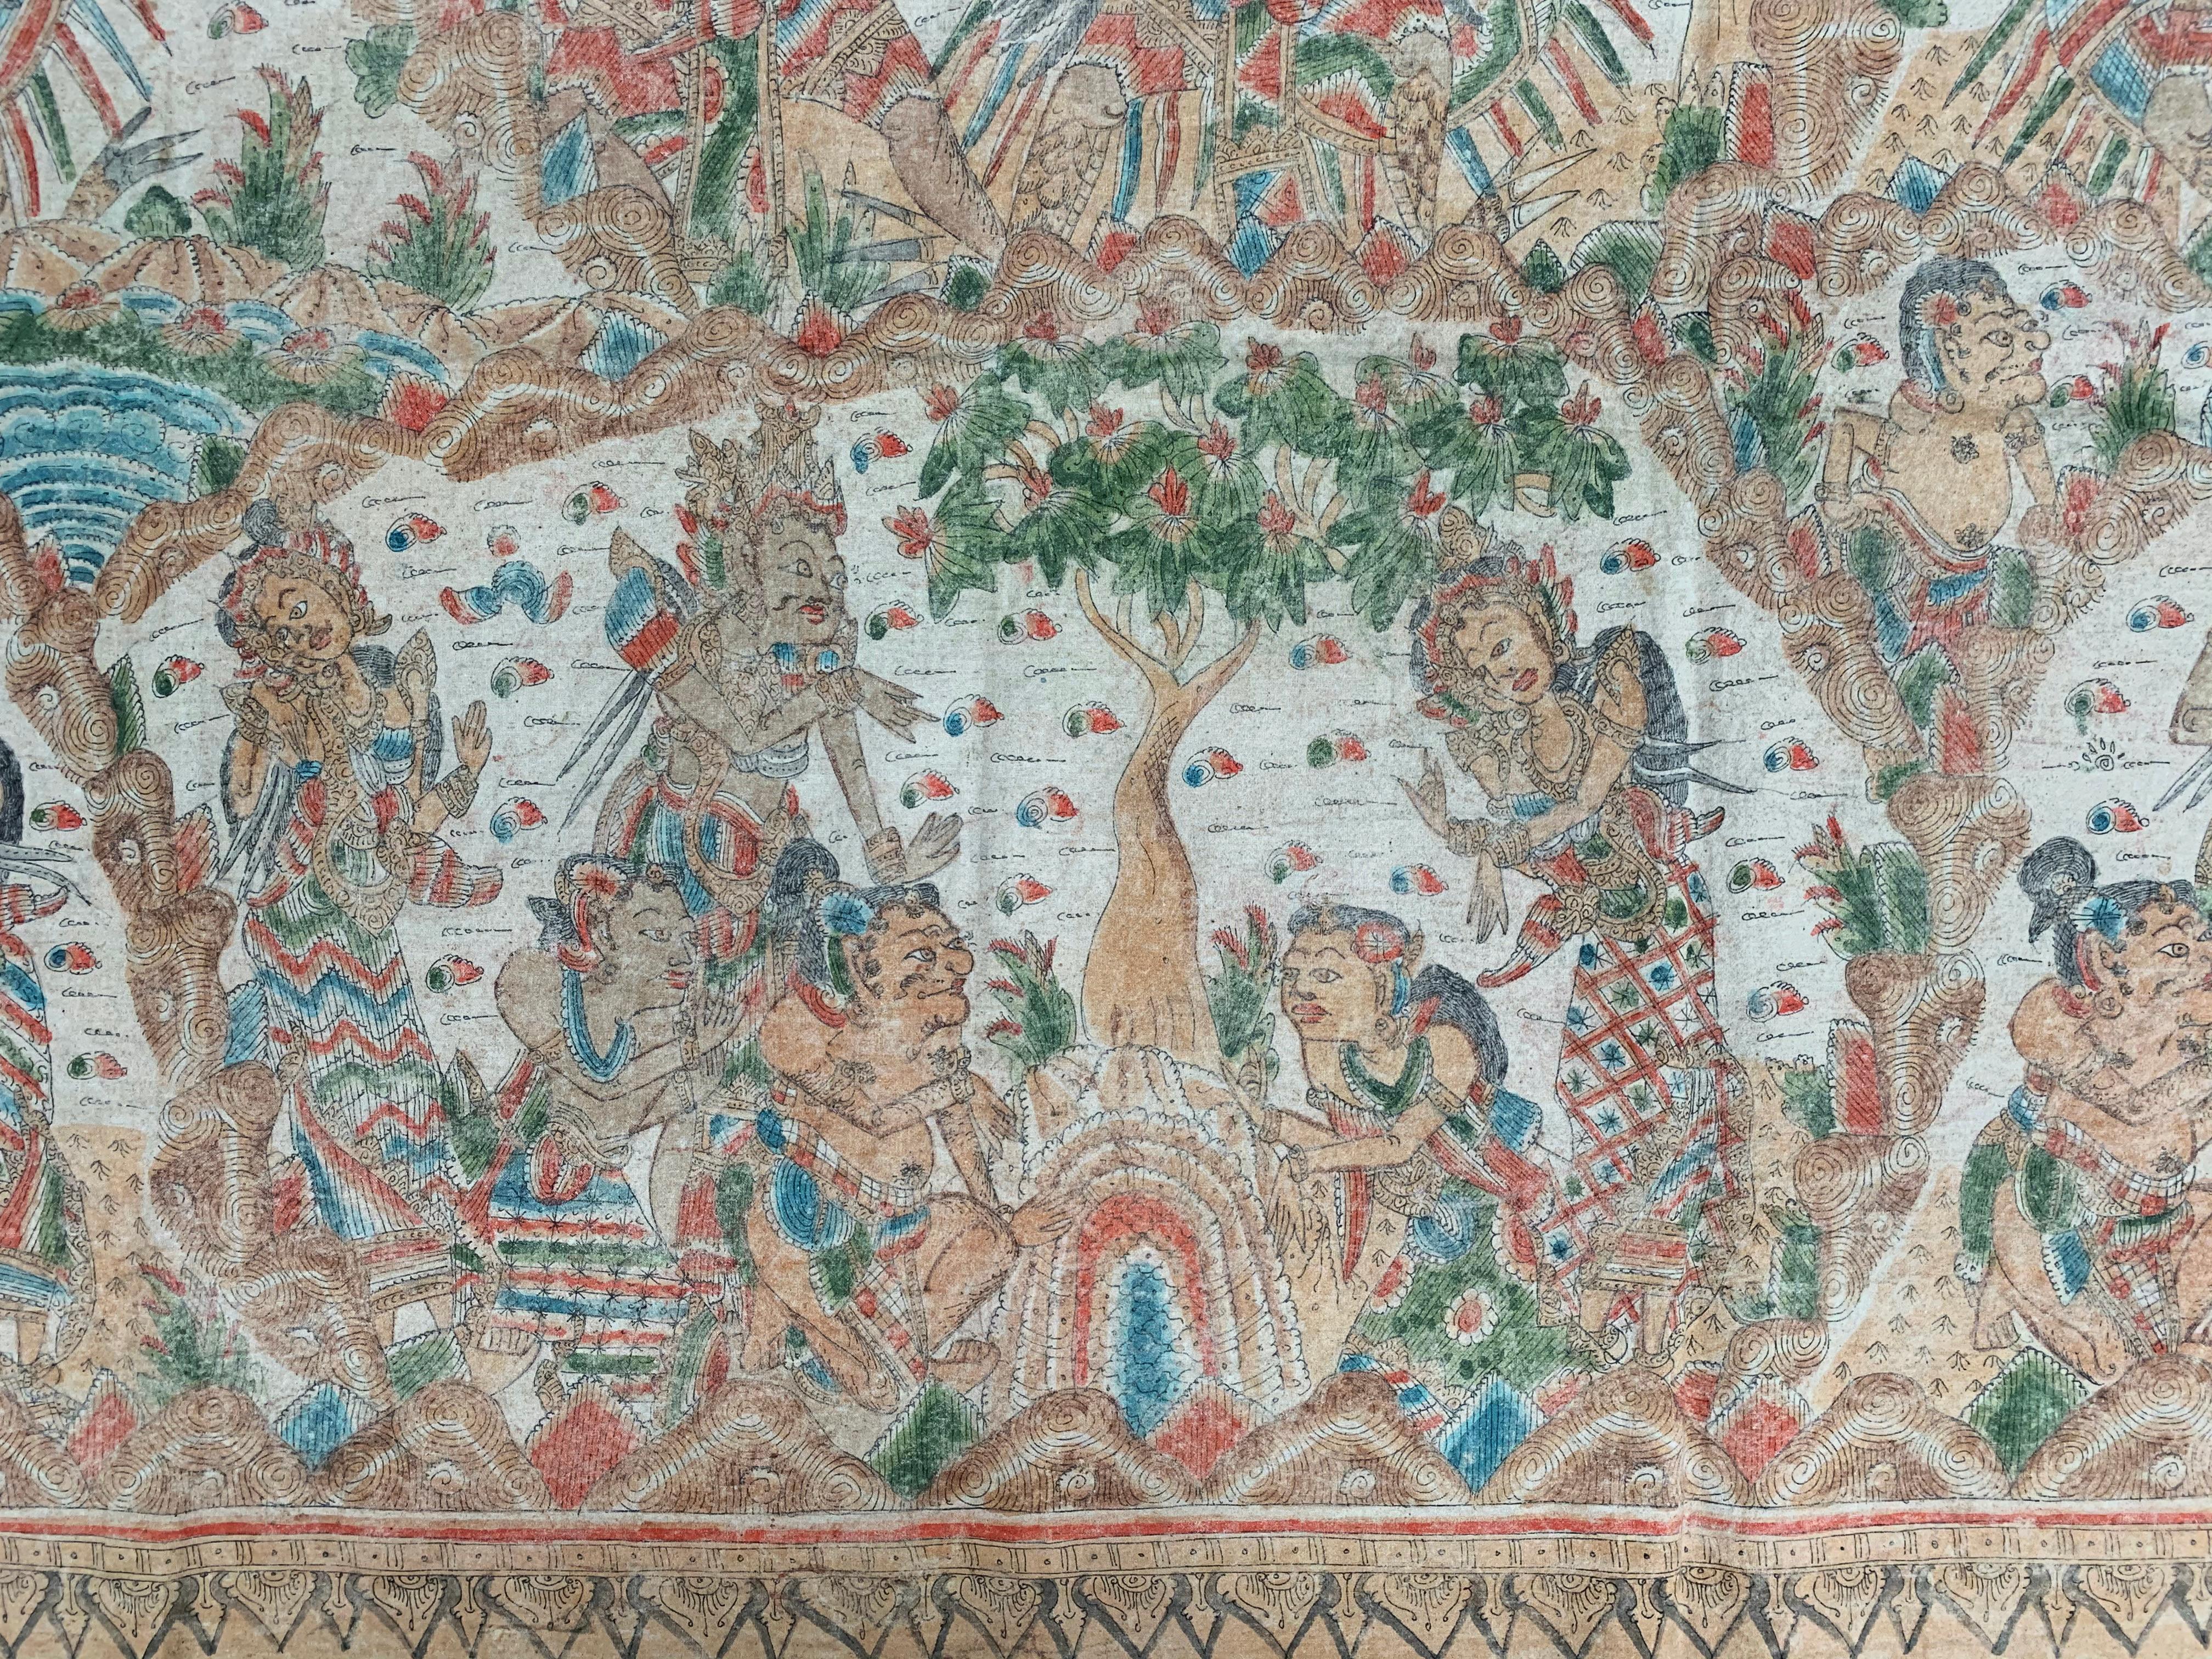 An early 20th century 'Kamasan' cotton textile painting from Bali, Indonesia. The hand-painted image has great detail and depicts Balinese Hindu mythology. 

Dimensions: Height 84cm x width 182cm.